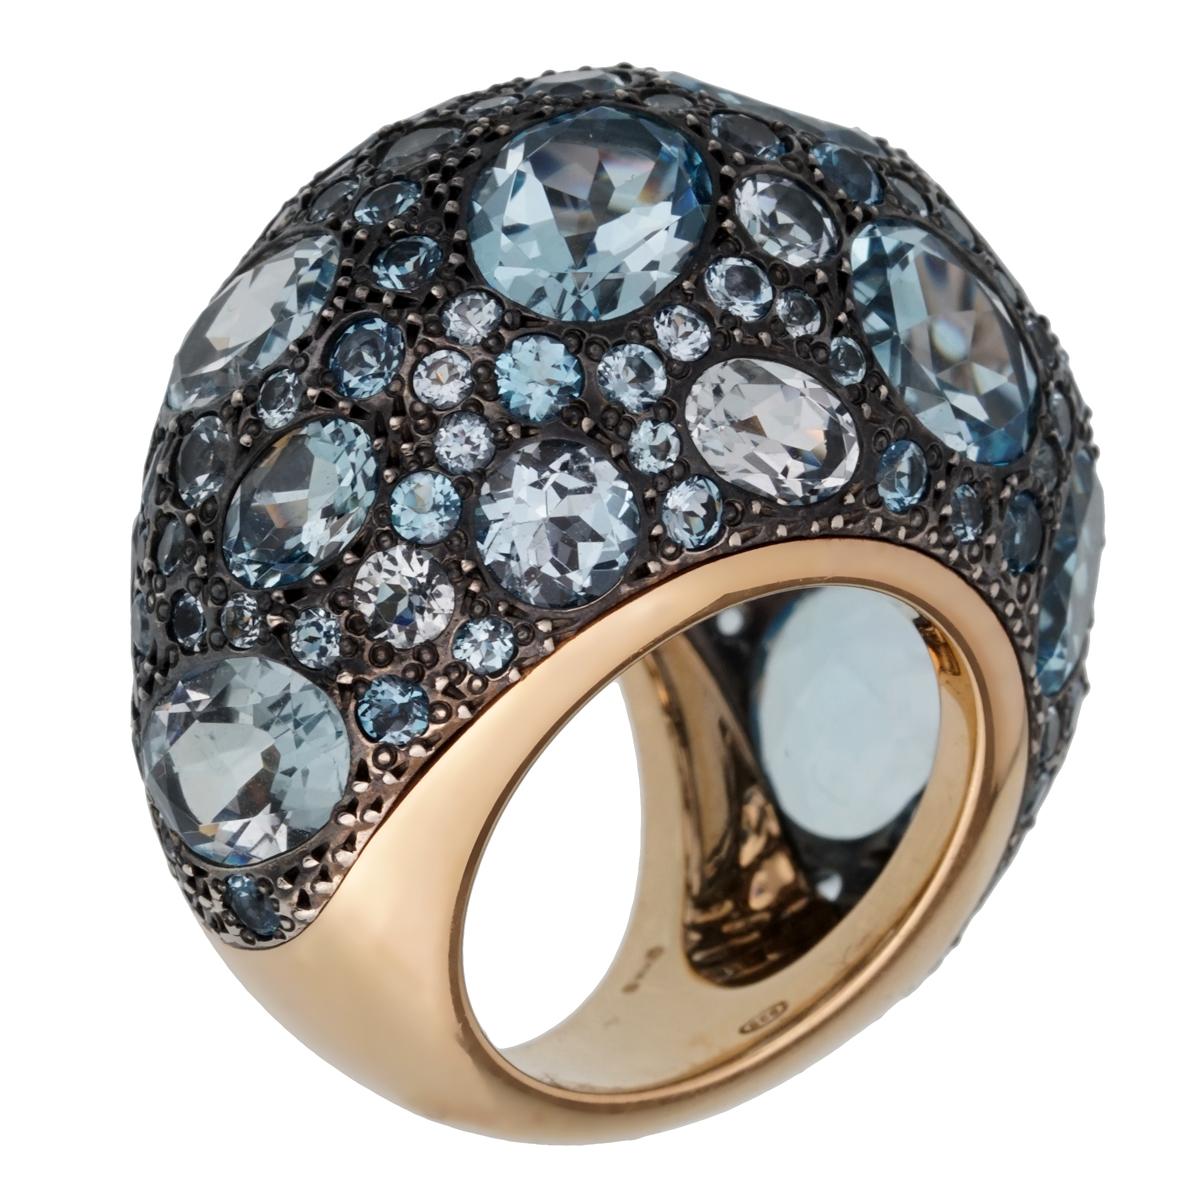 A magnificent bombe style brand new ring by Pomellato showcasing 12ct of multiple shaped topaz set in shimmering 18k rose gold. The ring measures a size 6 1/4 and can be resized.

Pomellato Retail Price: 9000
Sku: 2461